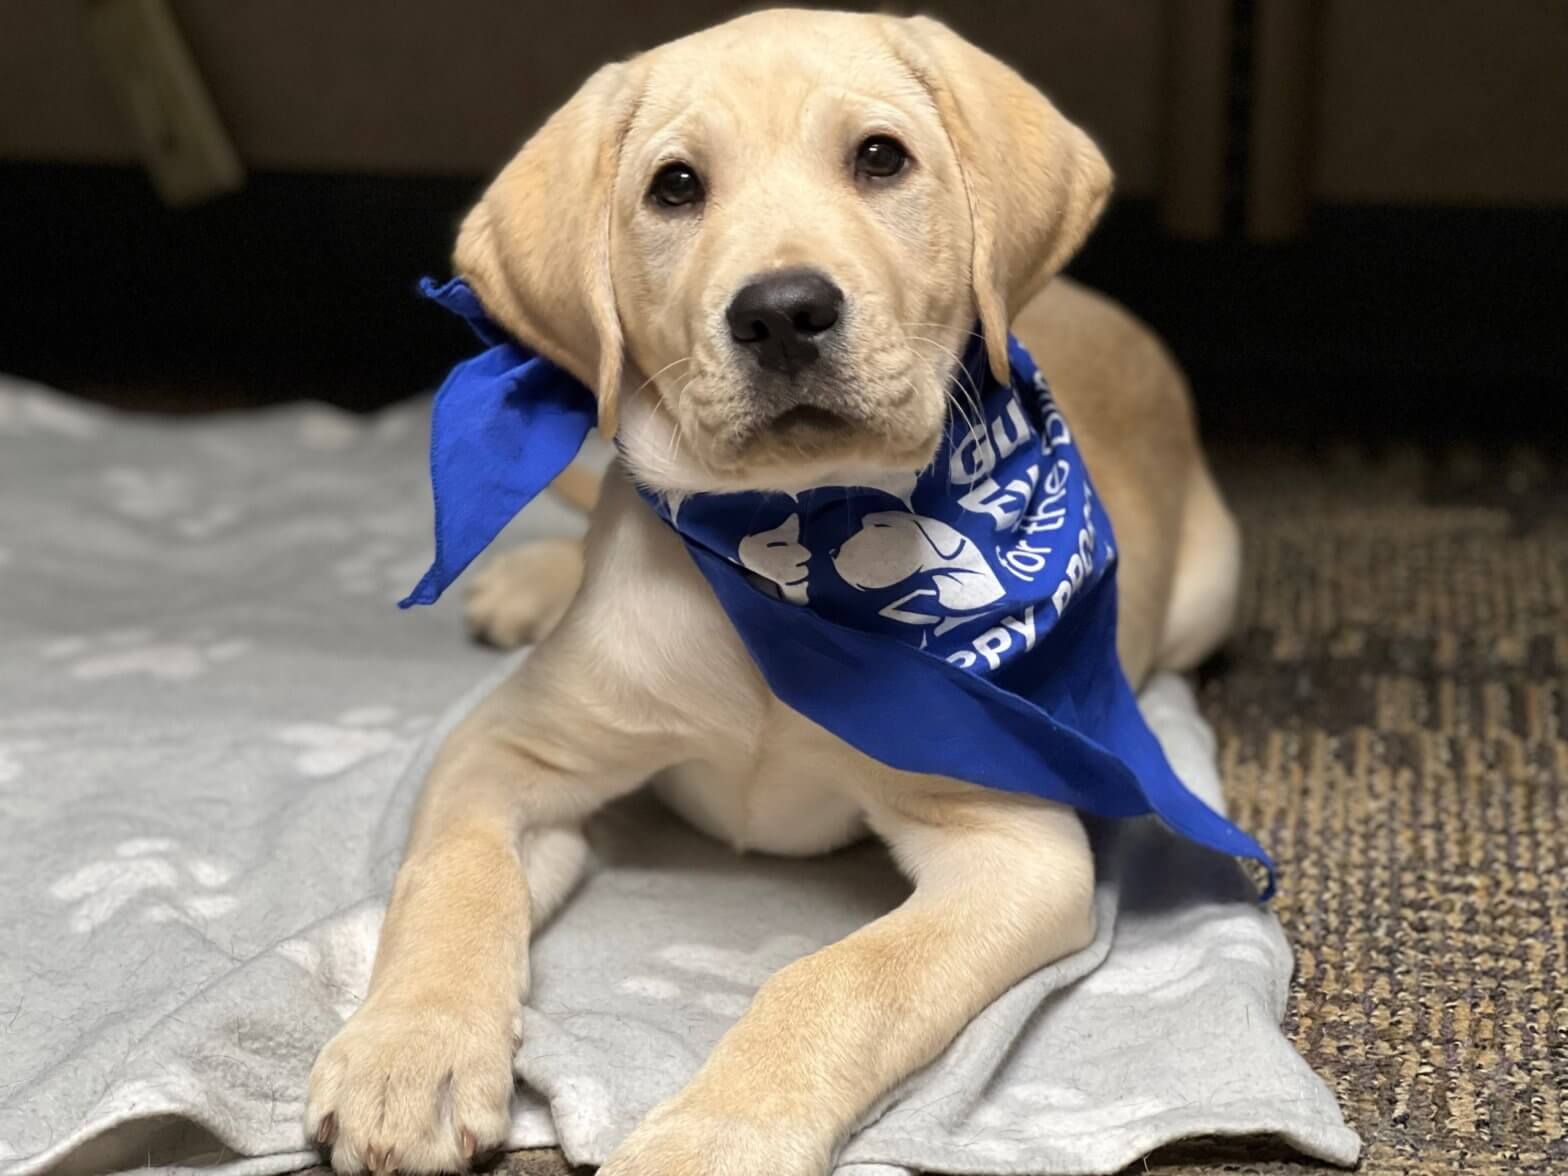 Yellow lab puppy Jenkins lays on the grey dog bed while wearing his blue puppy program bandana.